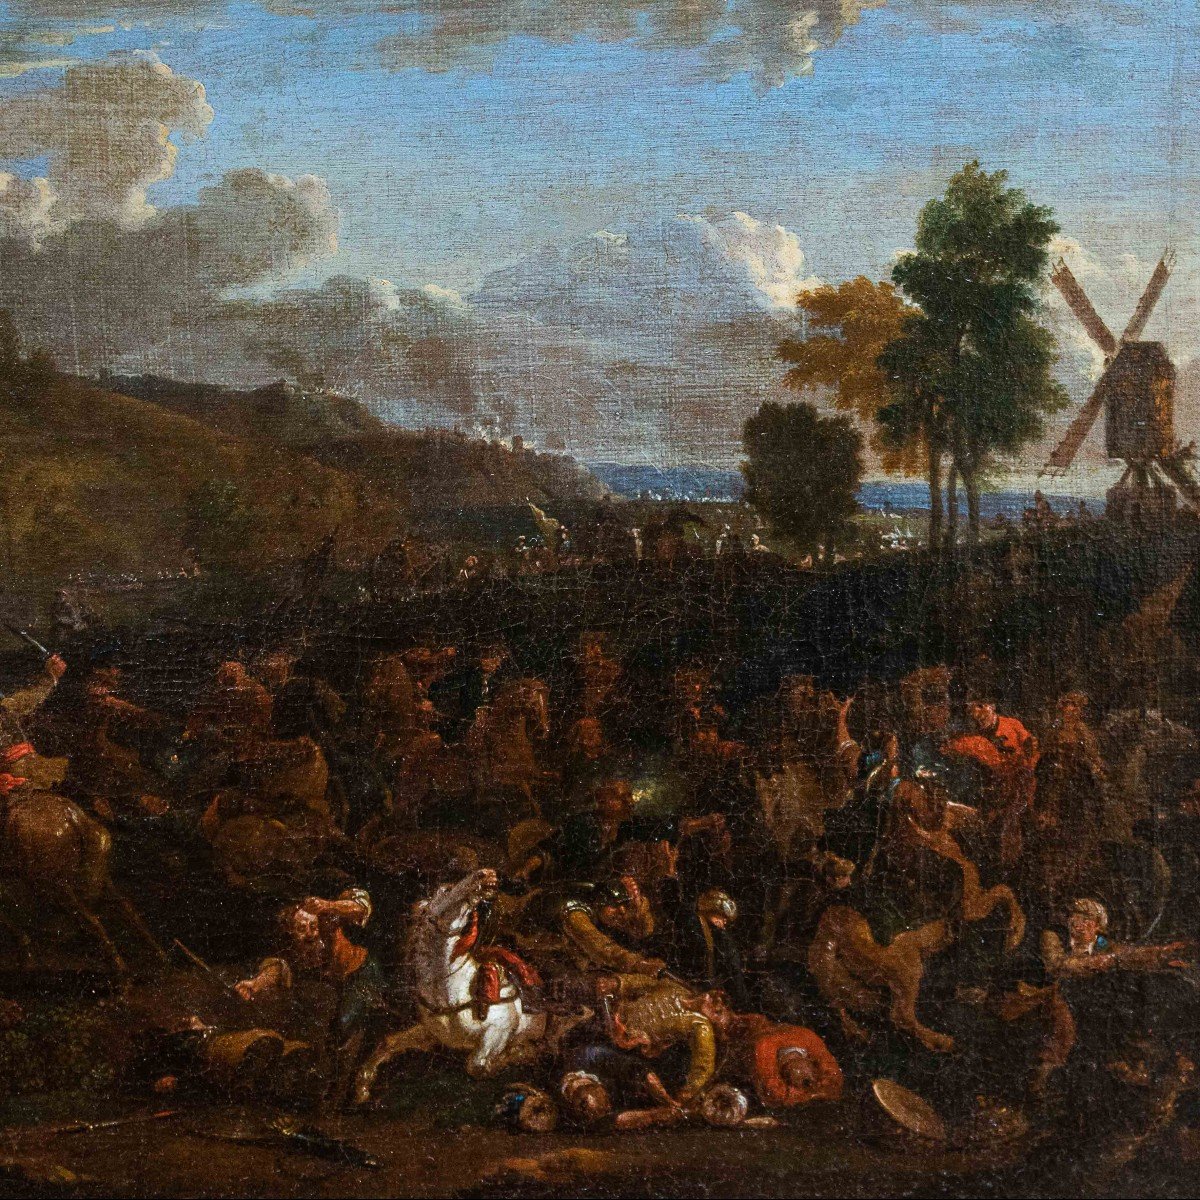 Attr. To Karel Breydel, Known As The Knight Of Antwerp (1678 - 1733), Battle With Knights-photo-2